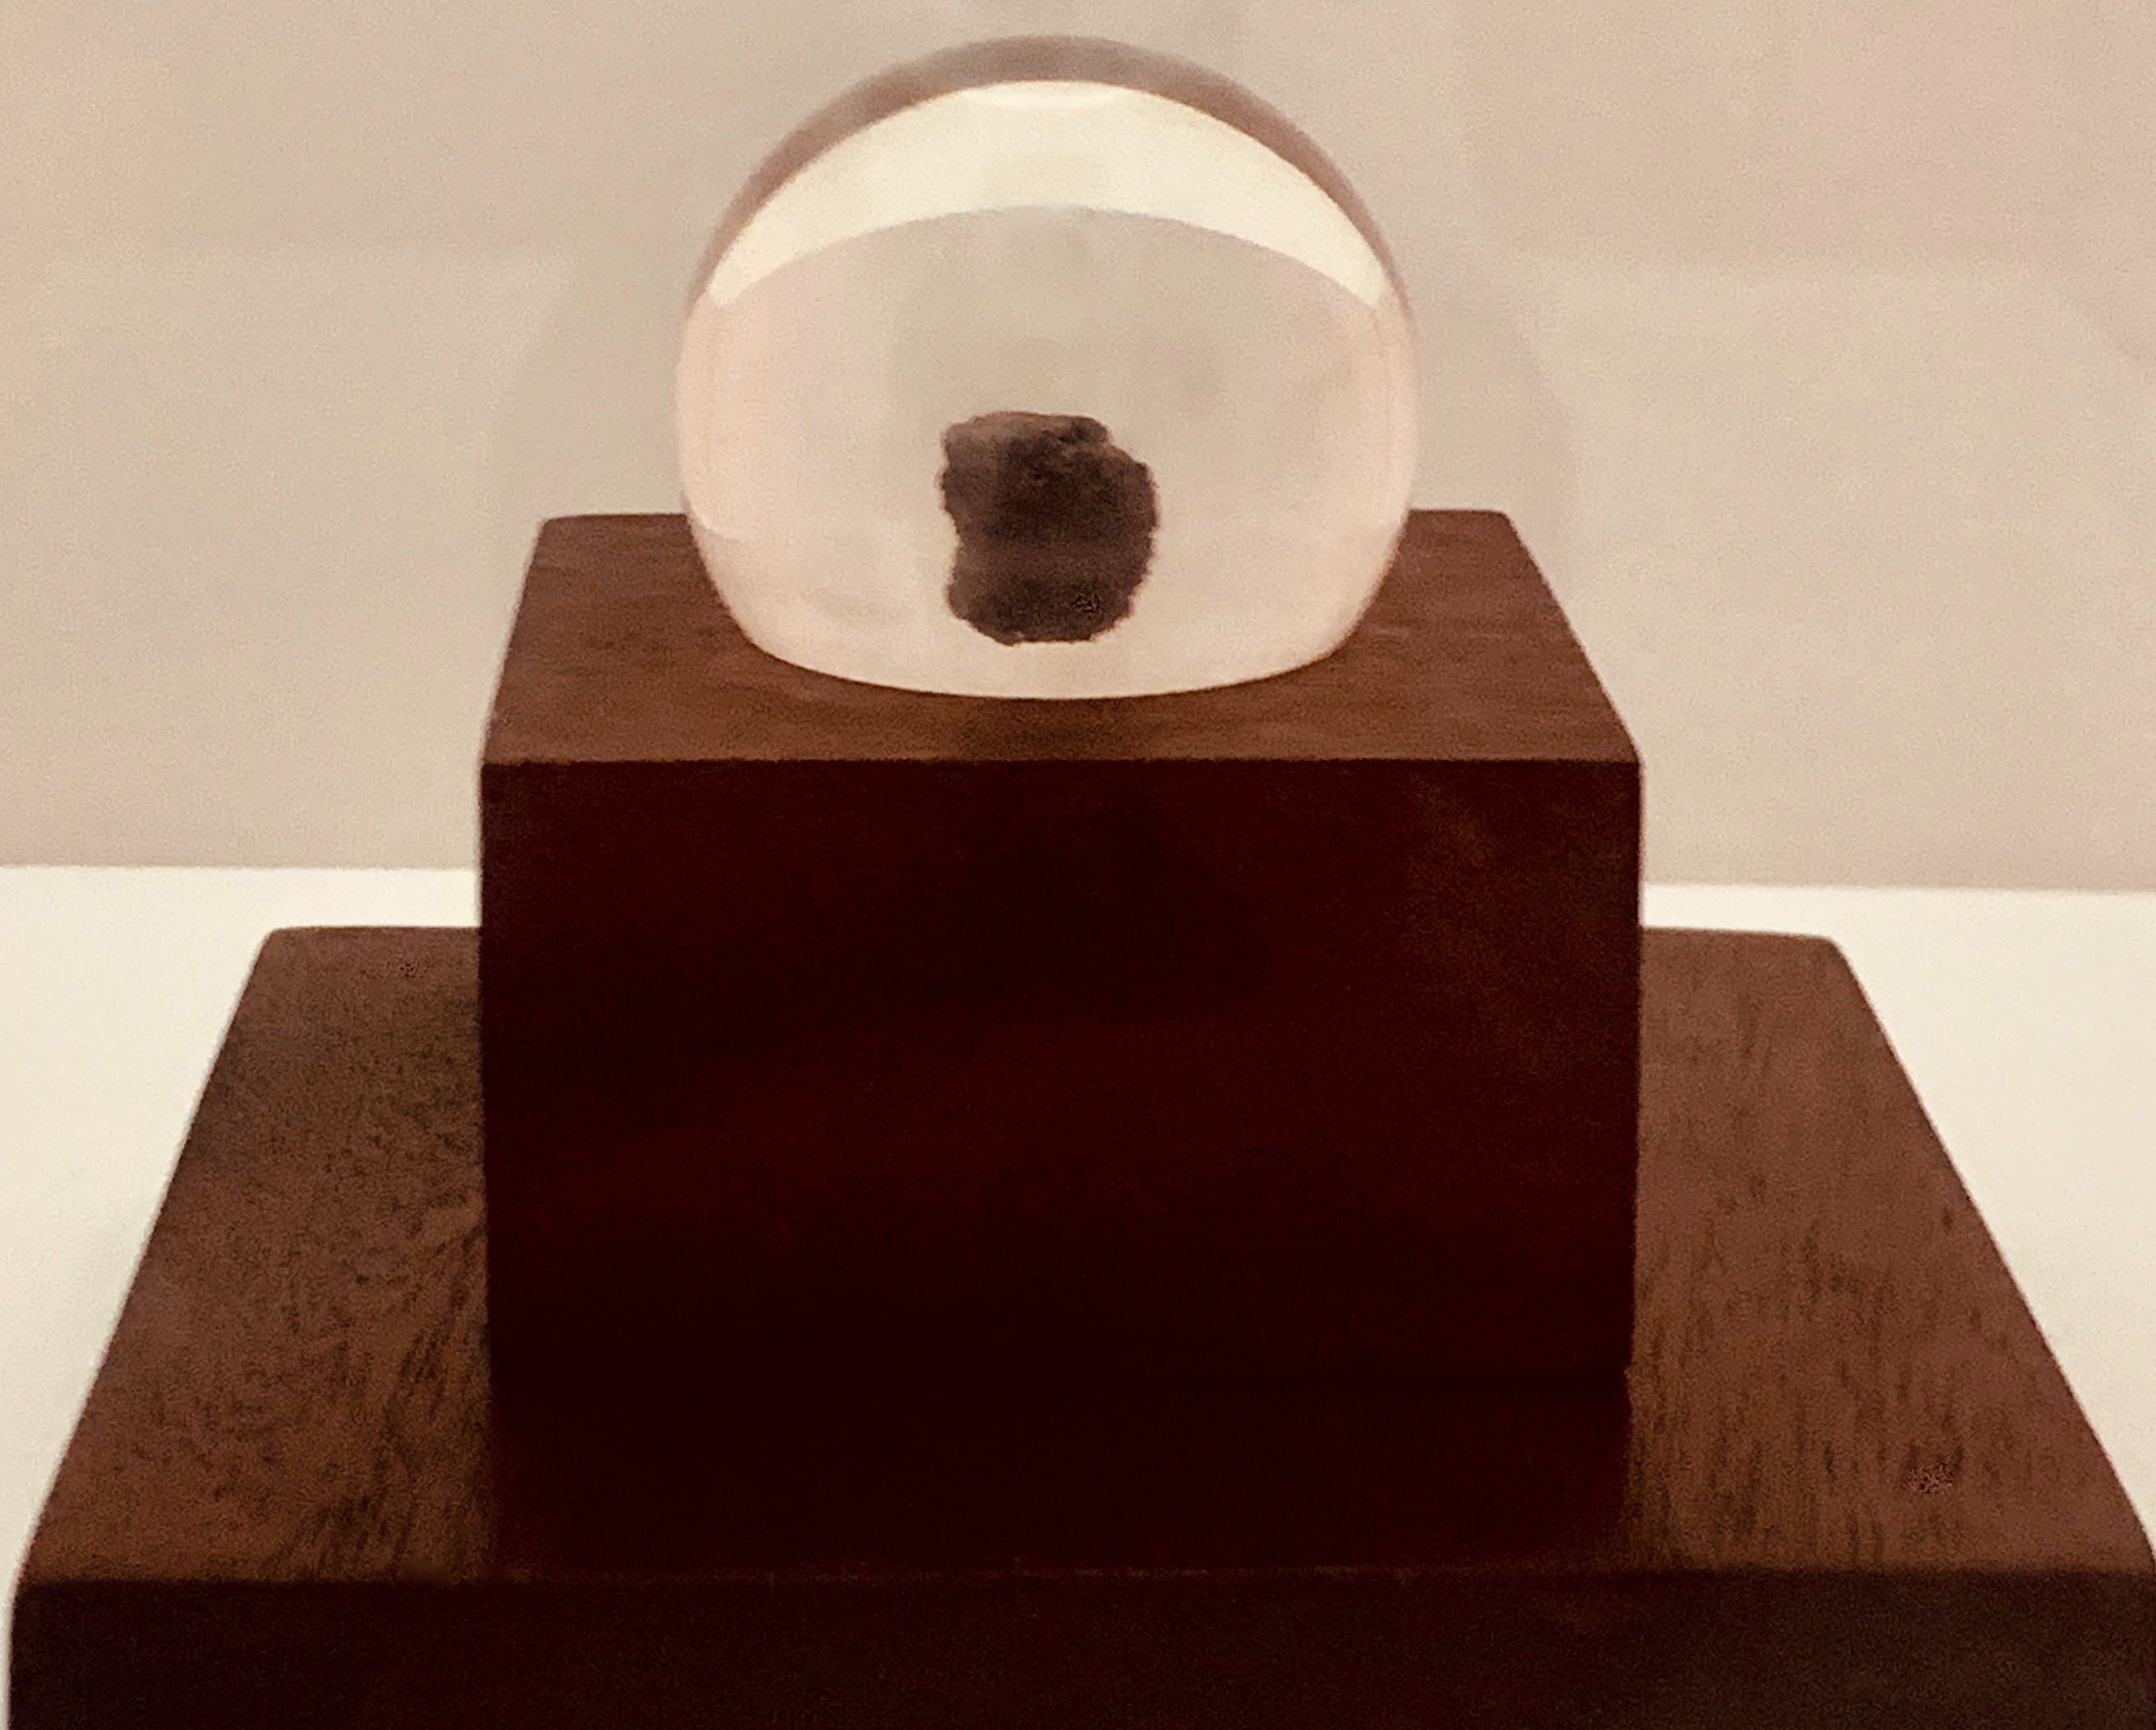 The Cambodian Goodwill Moon Rock